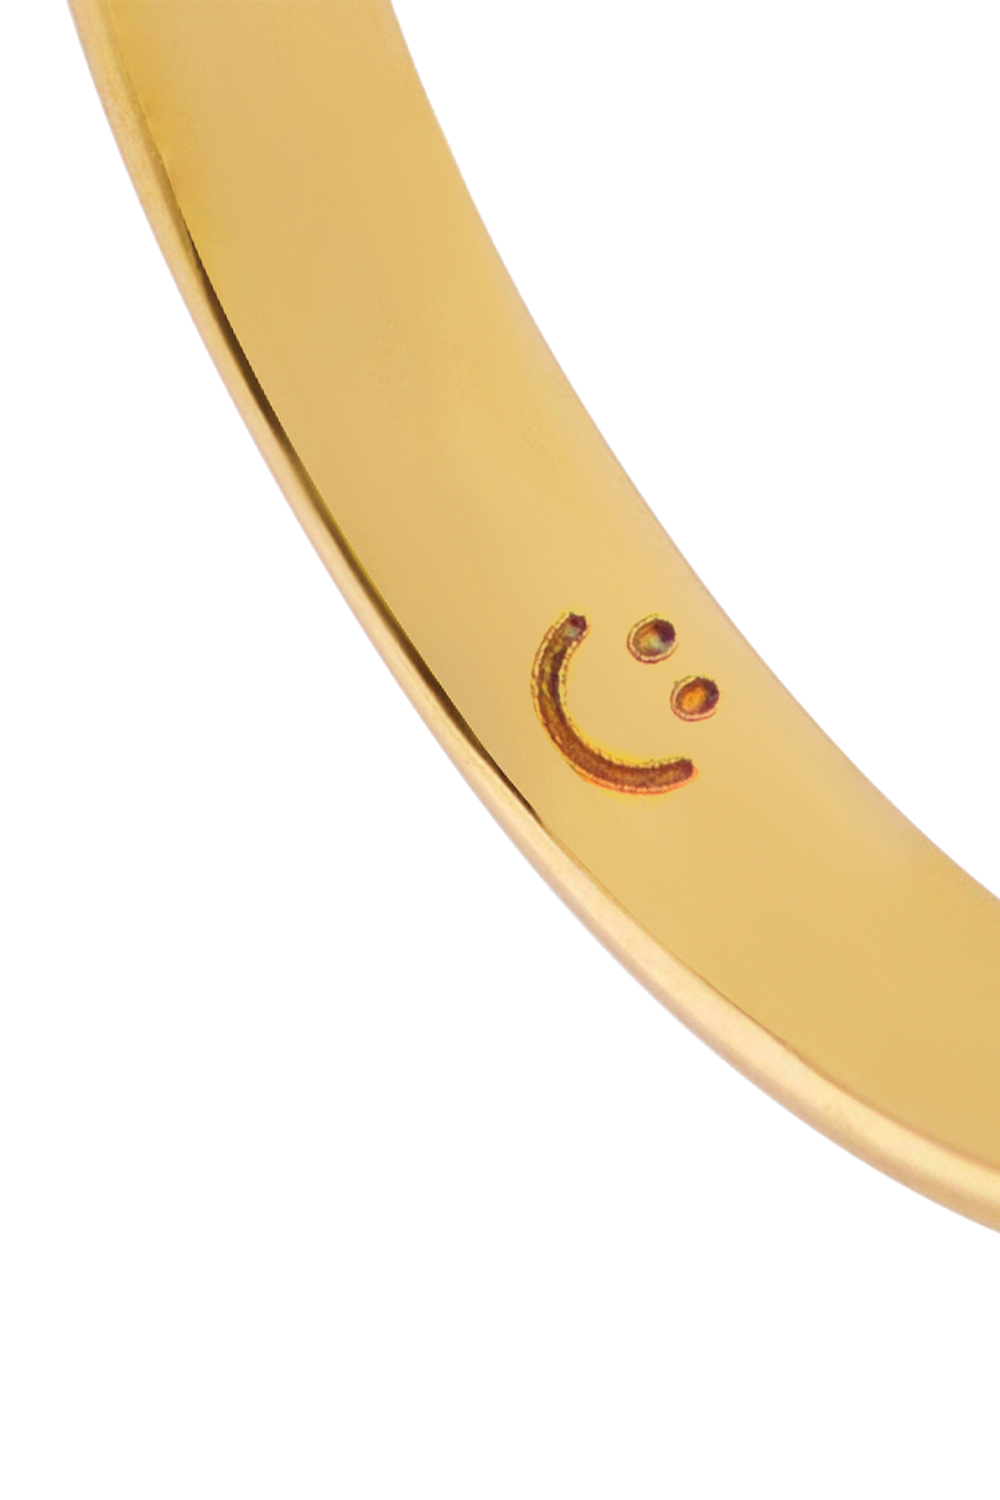 The Big Smiley Insider Ring